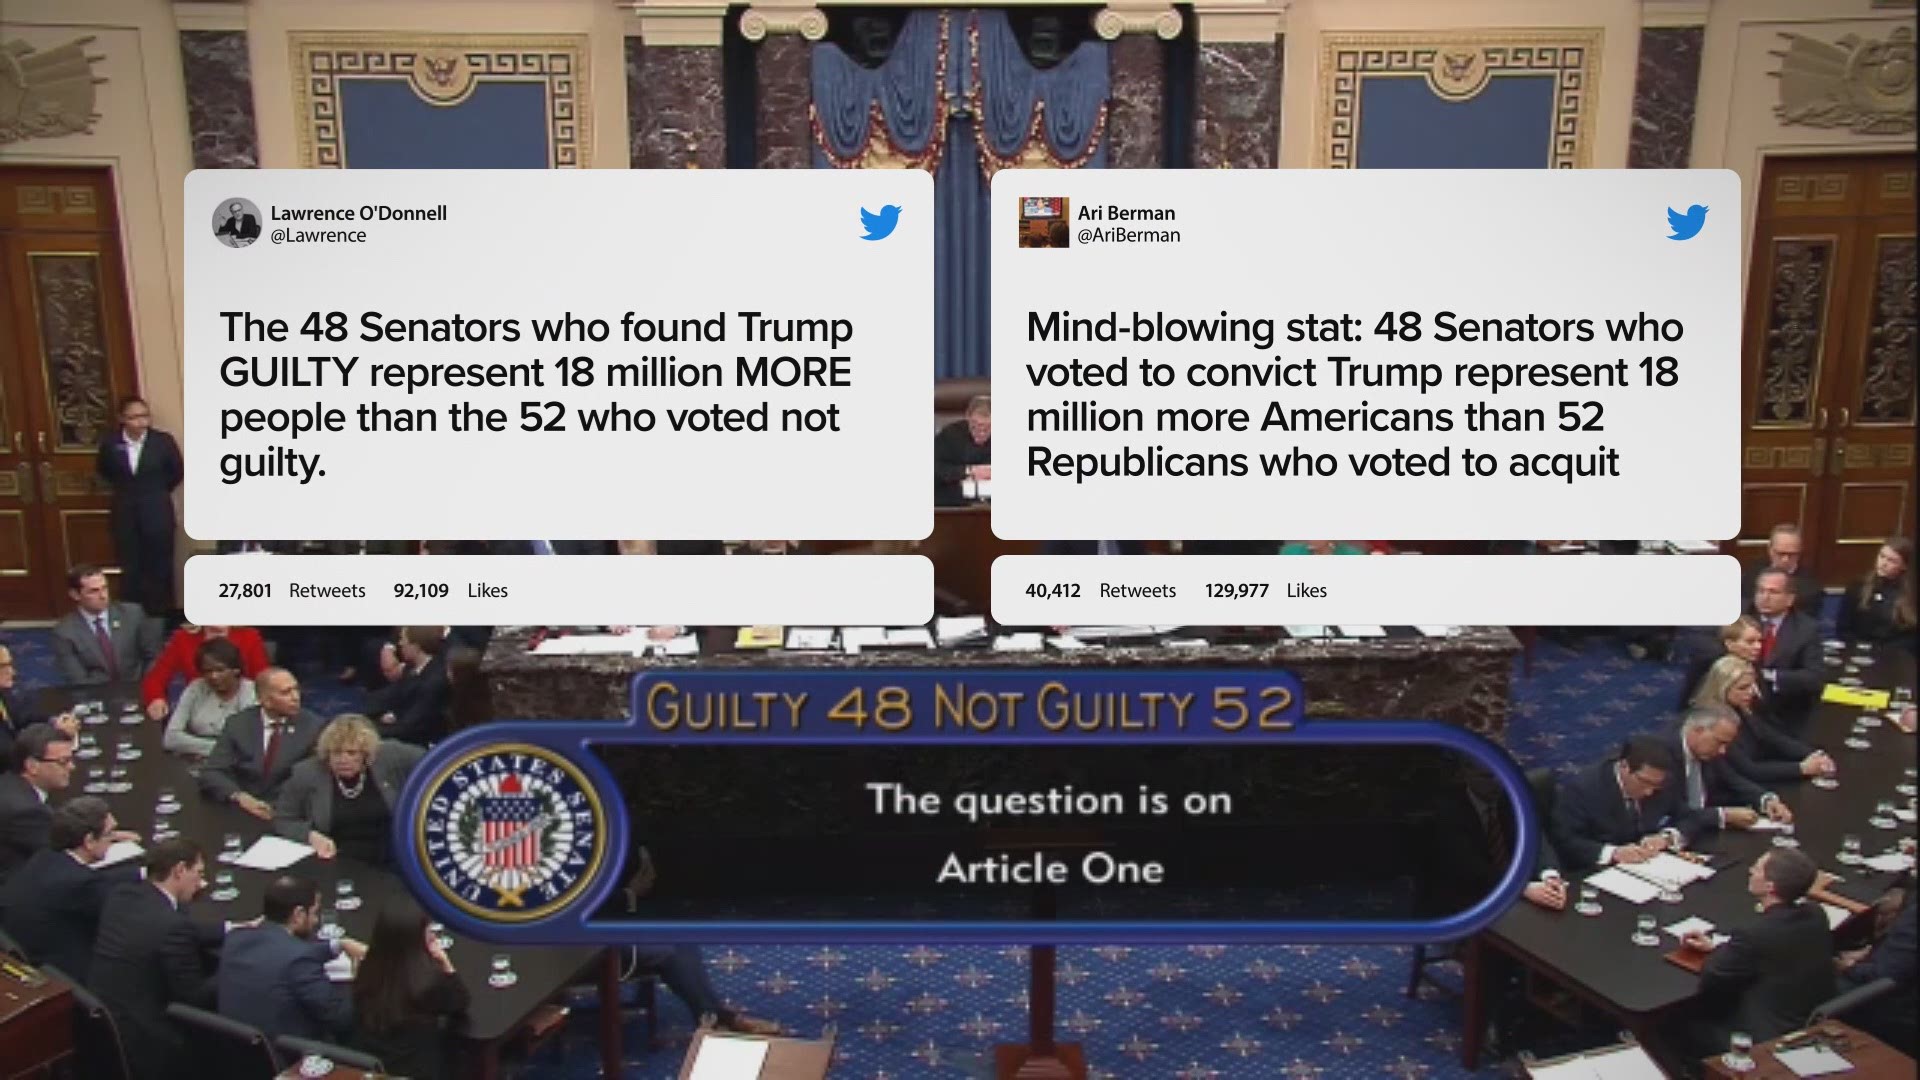 While the Senate votes did put an end to the Impeachment trial, a viral claim is questioning whether they really represented the will of the people.